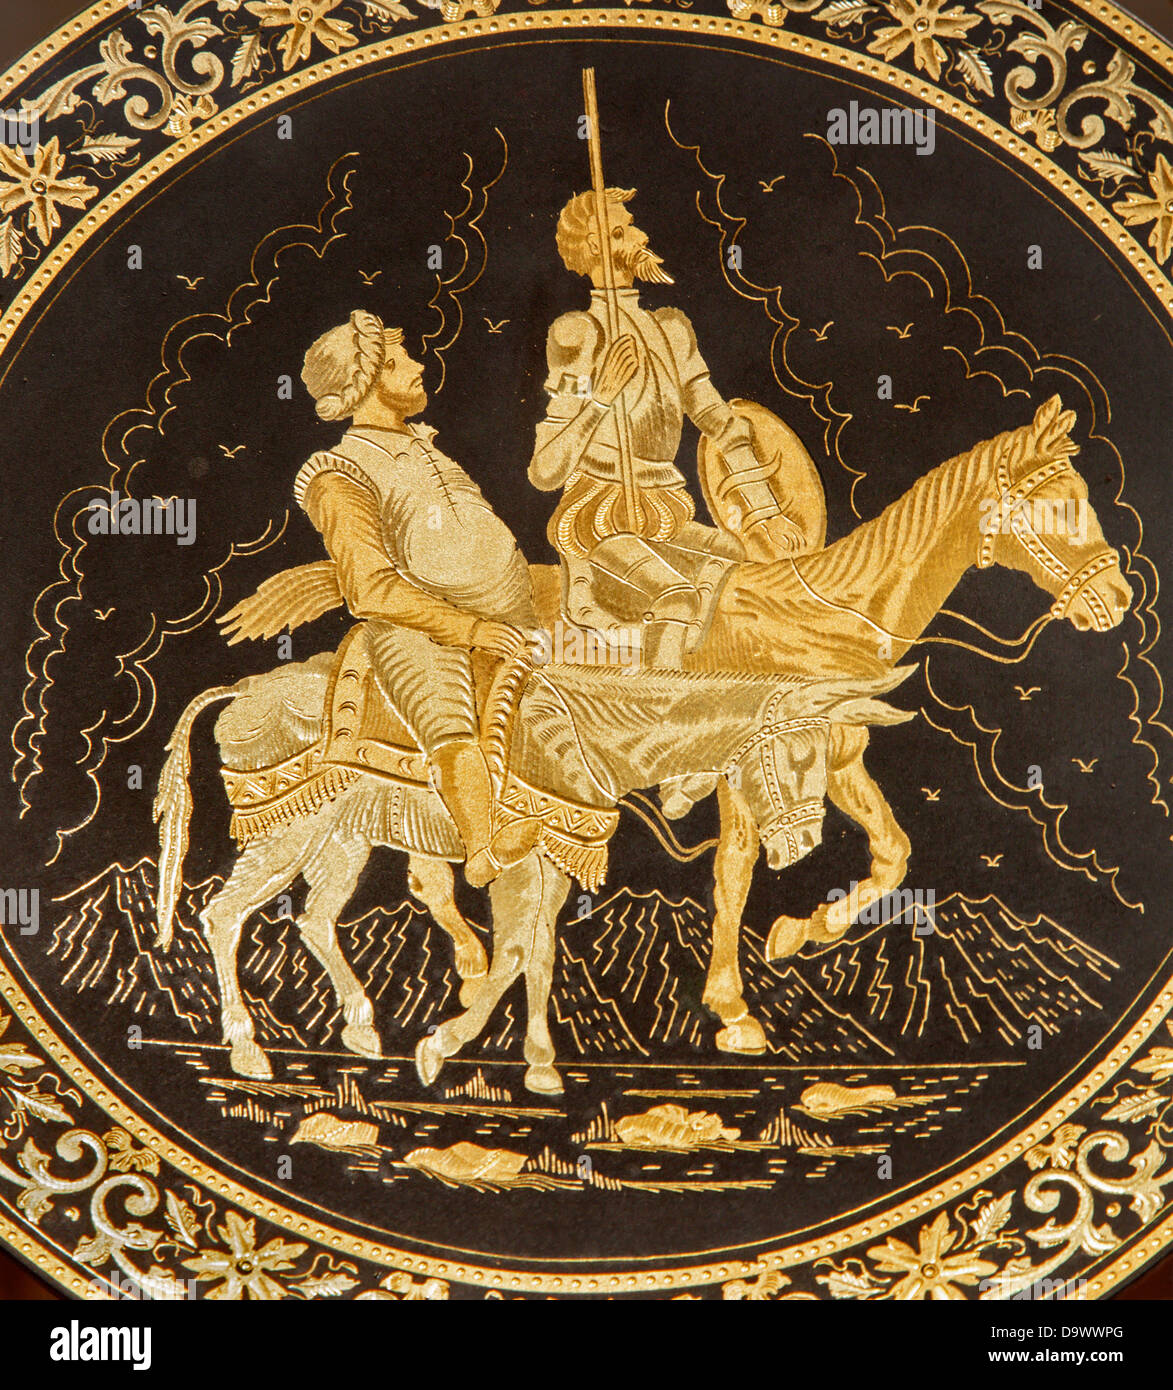 TOLEDO - MARCH 8: Detail of typical damascening plate with the Don Quixote and Sancho Panza. Stock Photo